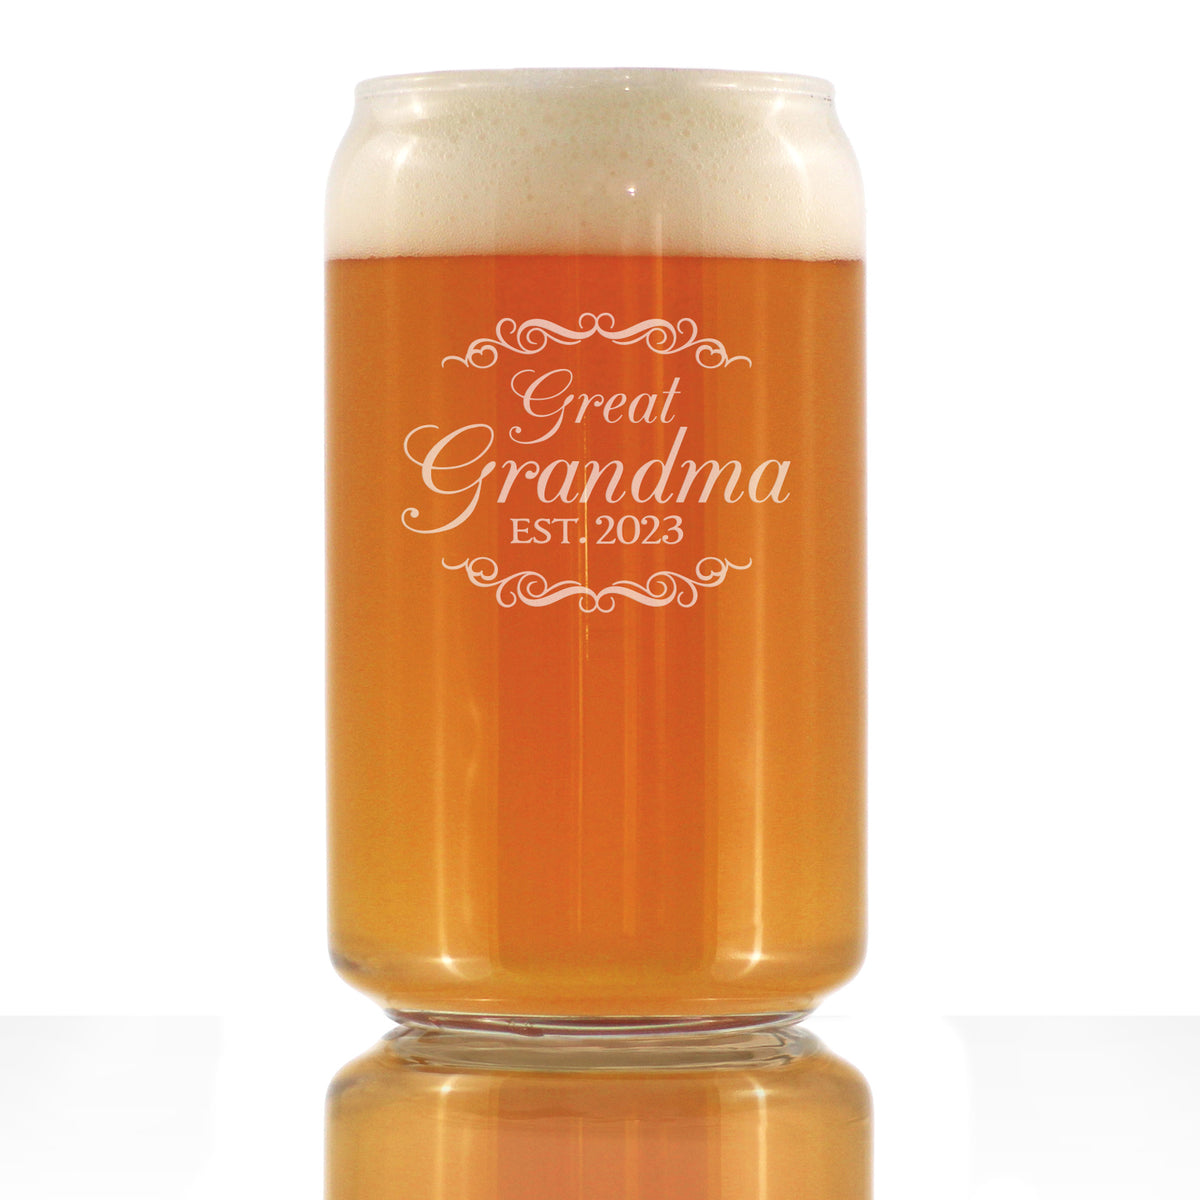 Great Grandma Est 2023 - New Great Grandmother Beer Can Pint Glass Gift for First Time Great Grandparents - Decorative 16 Oz Glasses